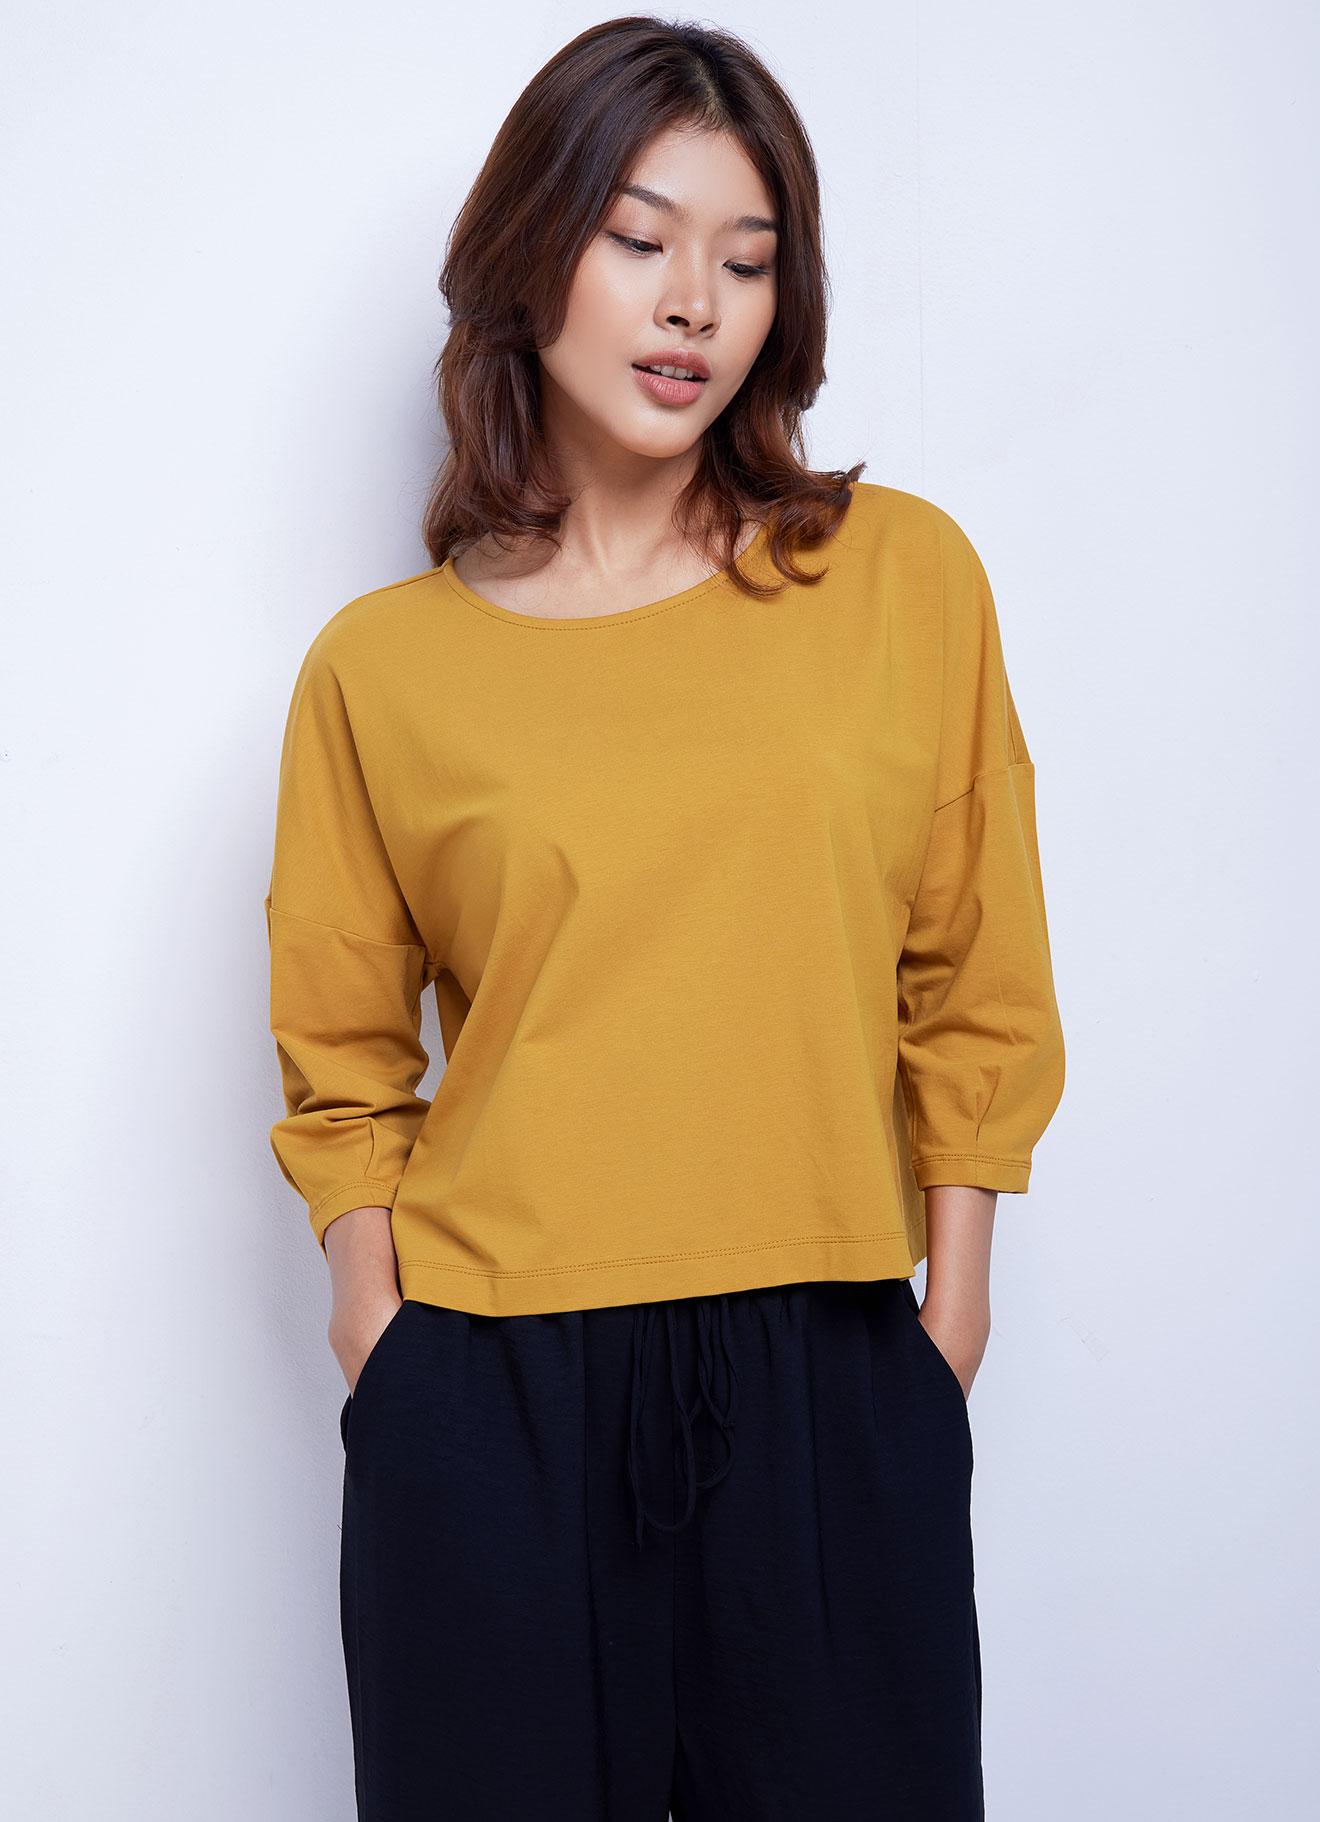 Sunflower by Sleeve Top